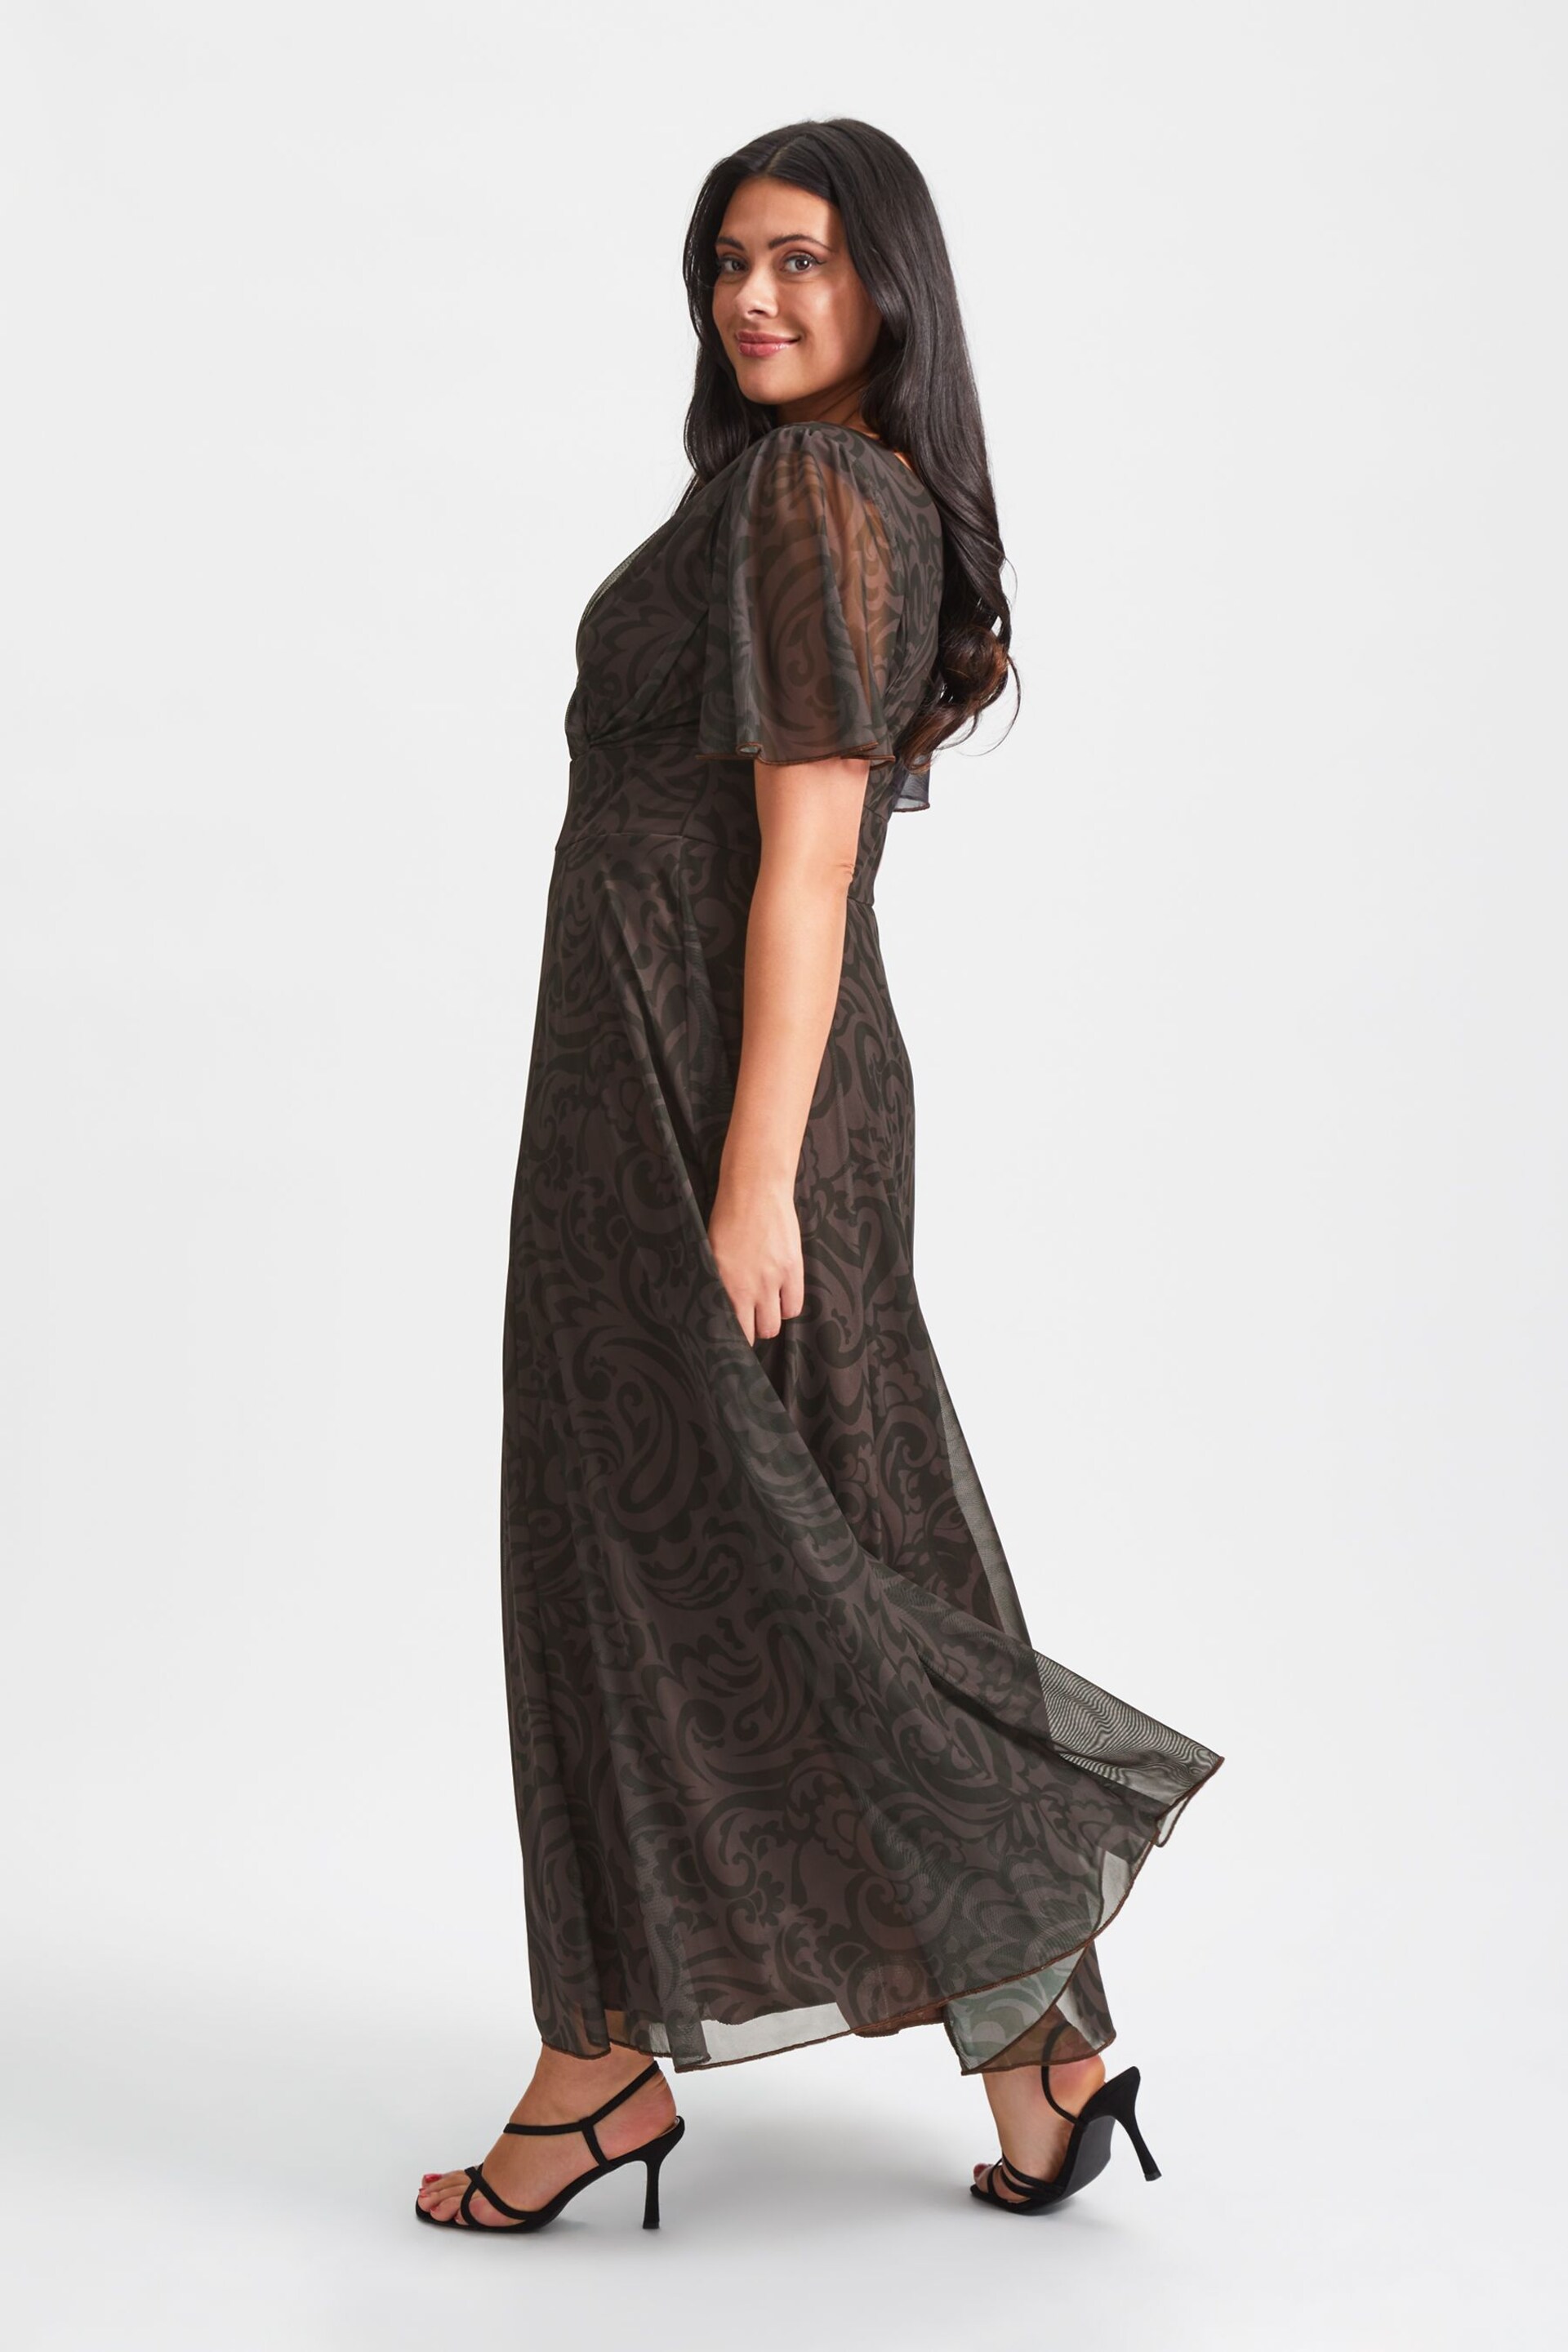 Scarlett & Jo Chocolate Brown Paisley Isabelle Angel Sleeve Maxi Dress - Image 3 of 4